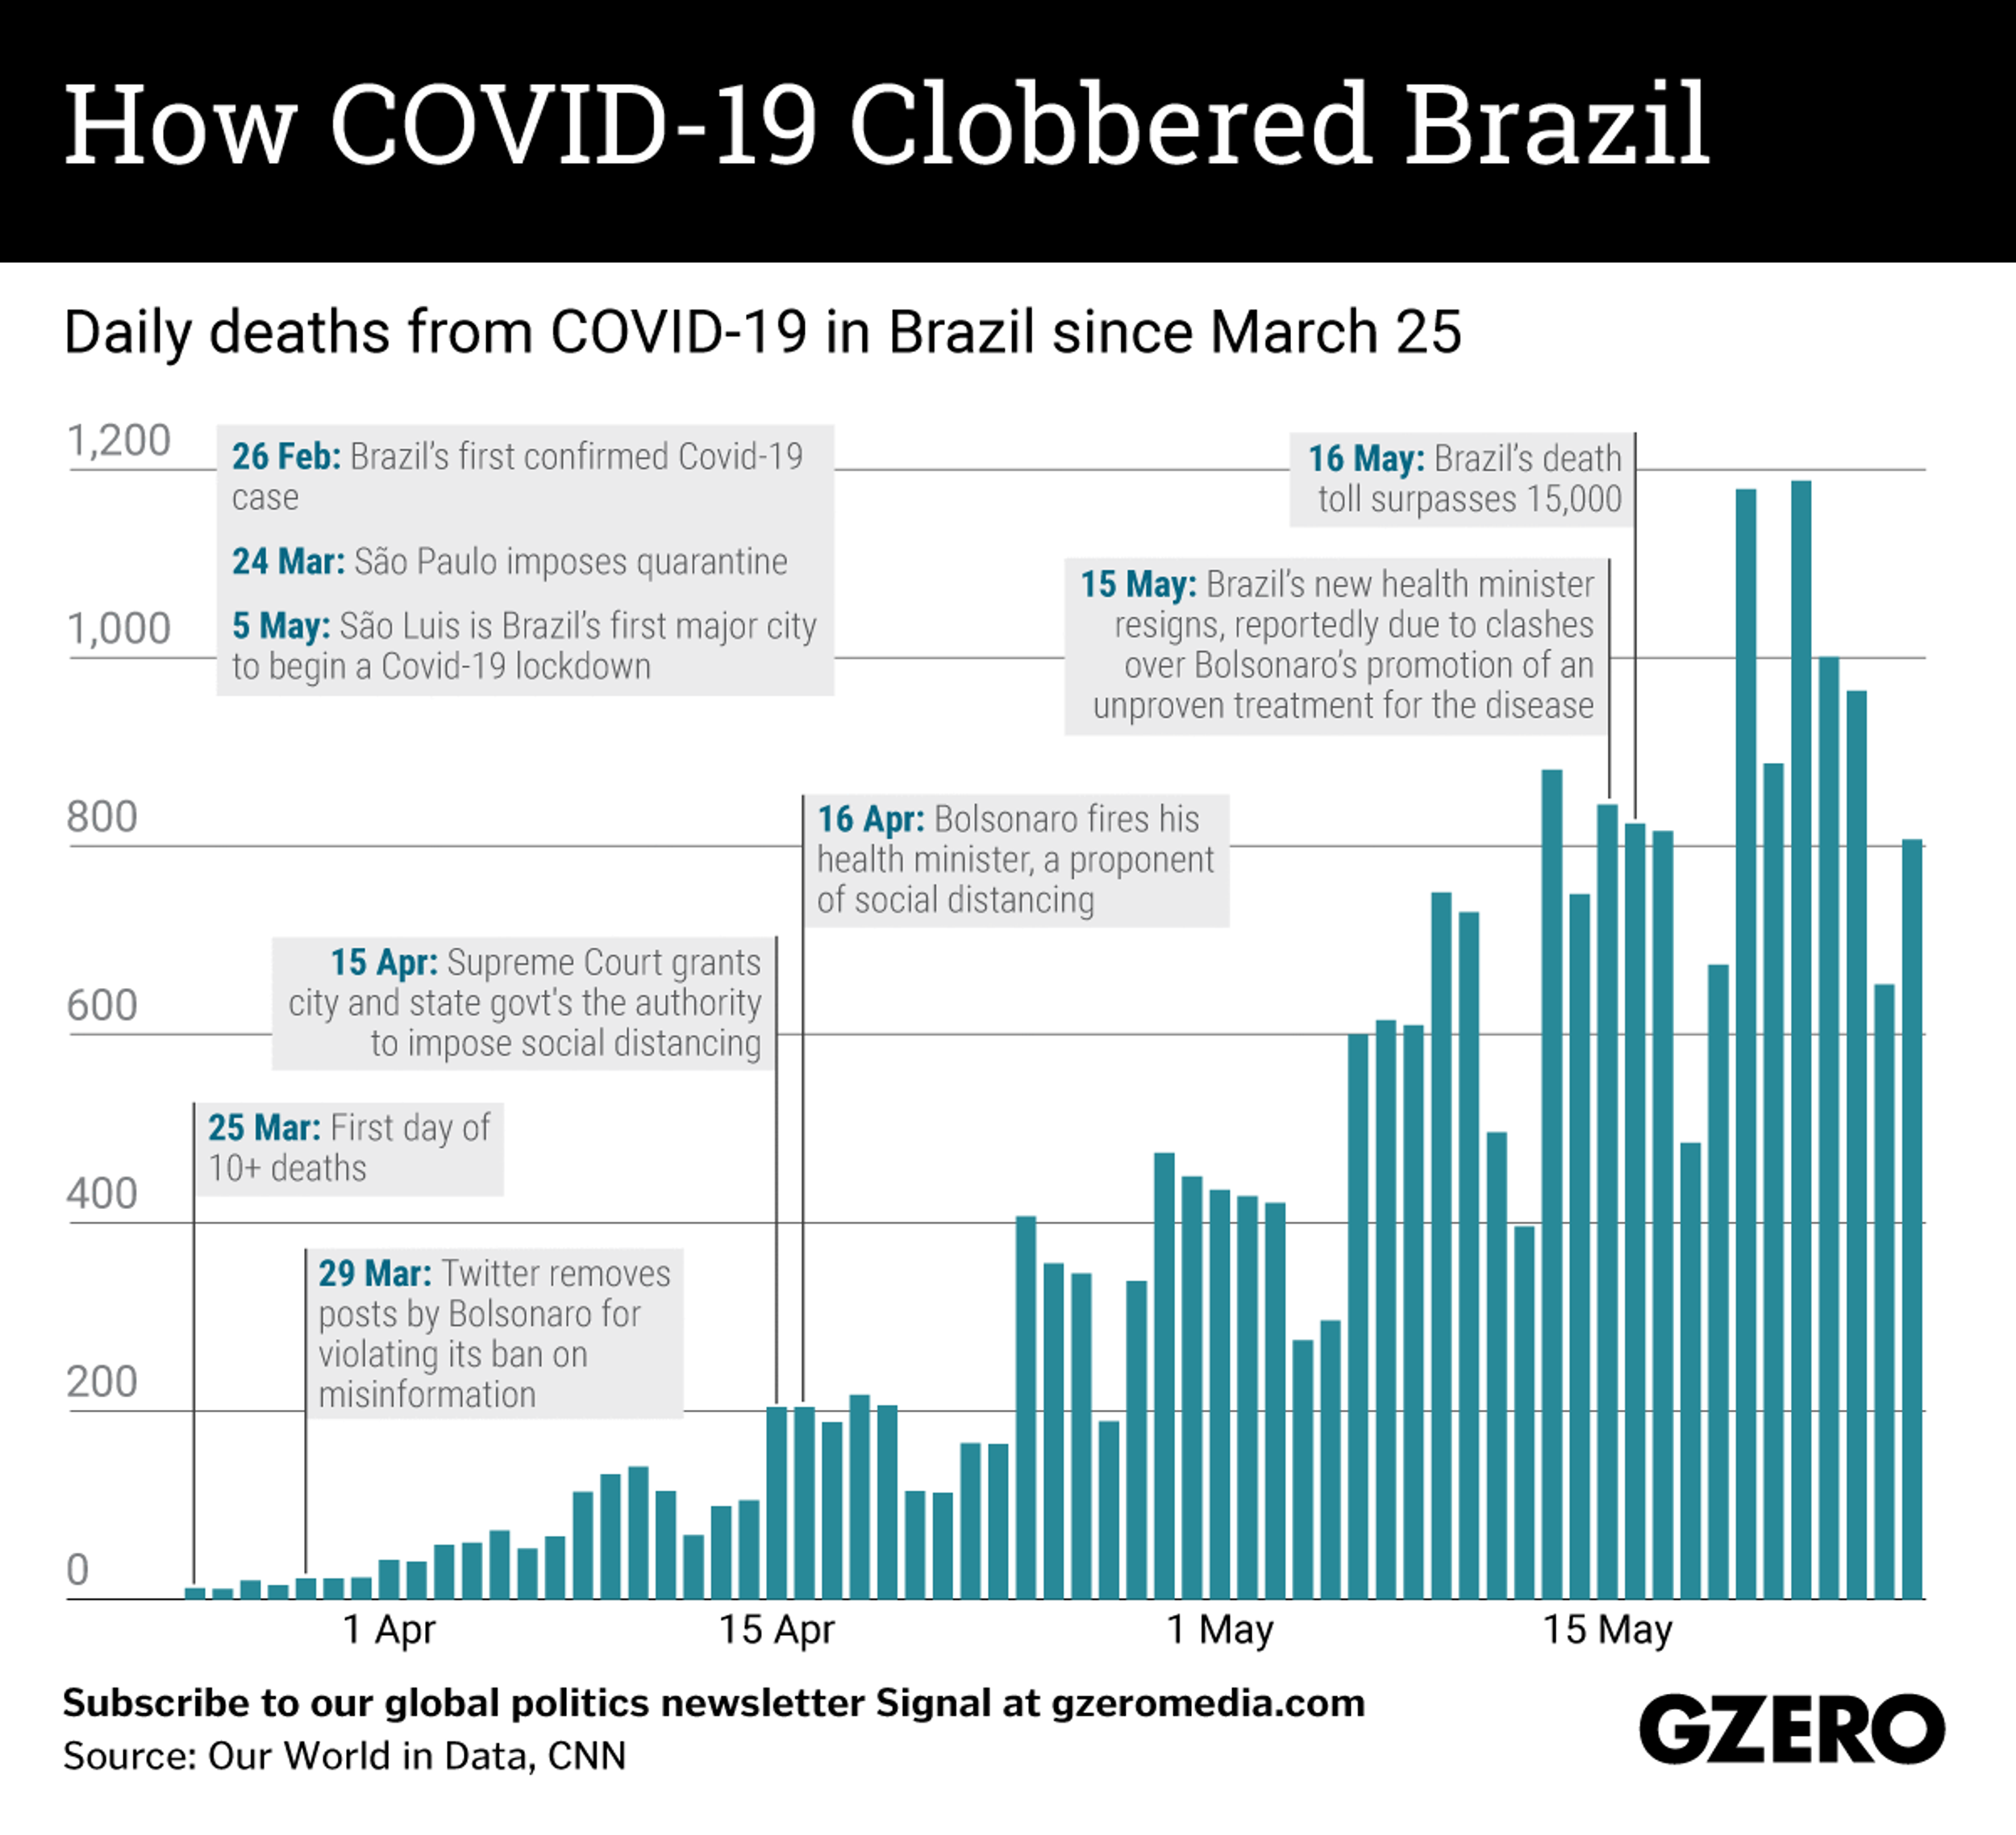 The Graphic Truth: How COVID-19 Clobbered Brazil